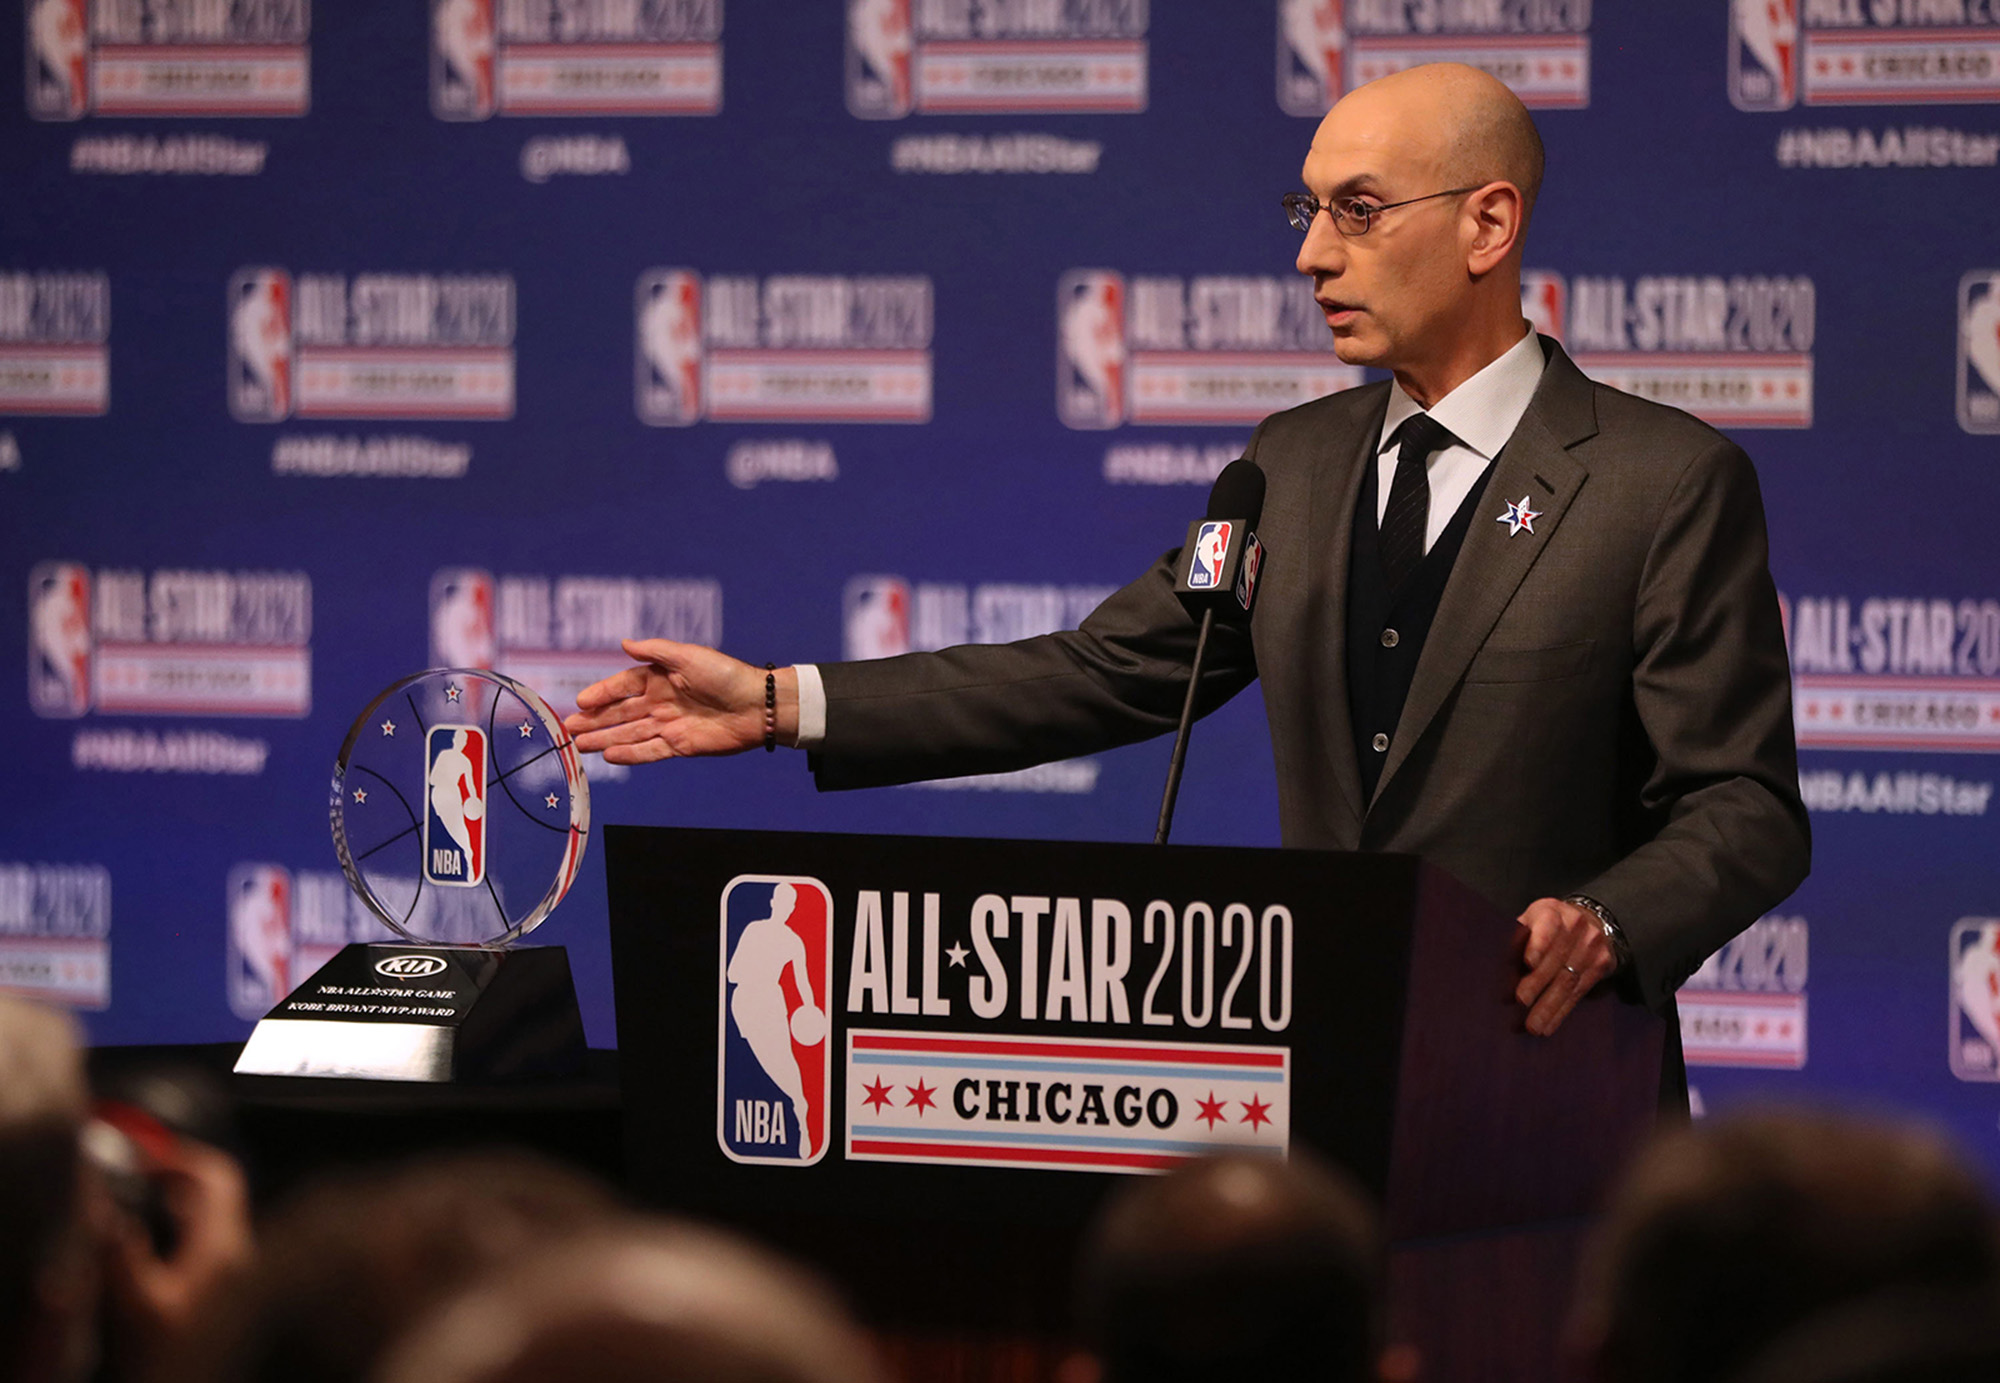 NBA Commissioner Adam Silver talks during events at NBA All-Star weekend on Feb. 15, 2020, at the United Center in Chicago. (Chris Sweda/Chicago Tribune/TNS)